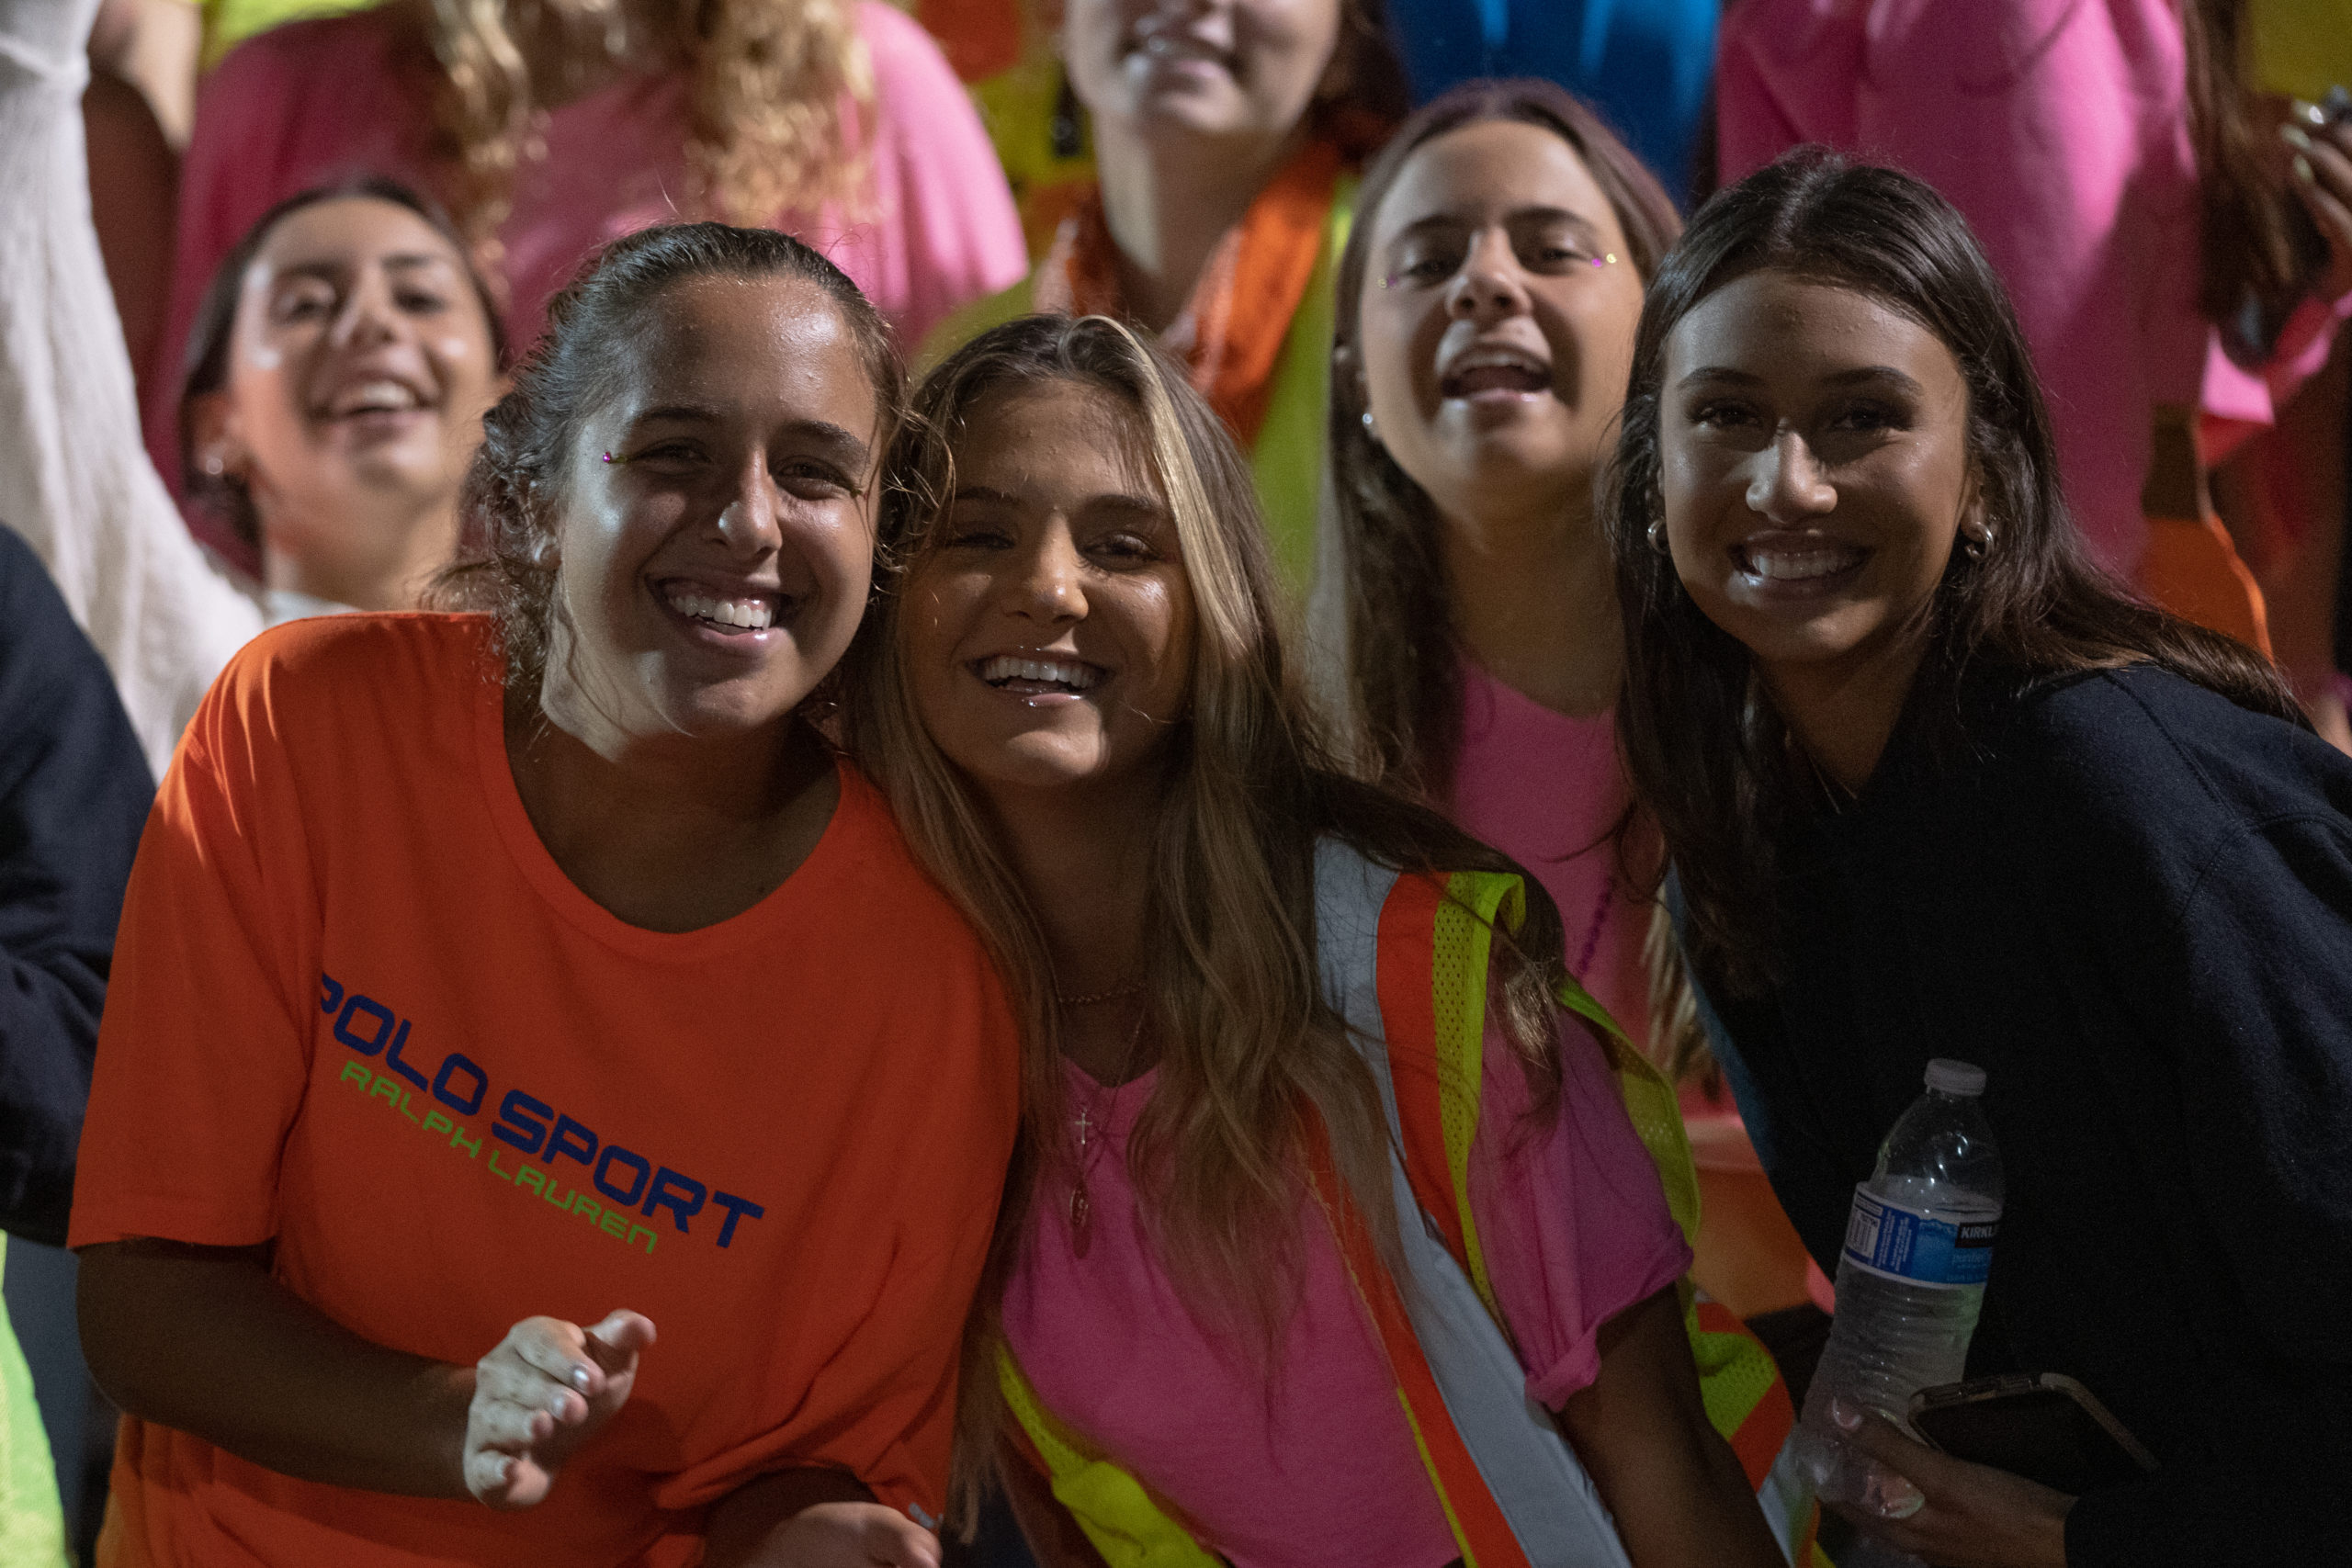 Westhampton Beach students dressed in neon for Friday night's game.